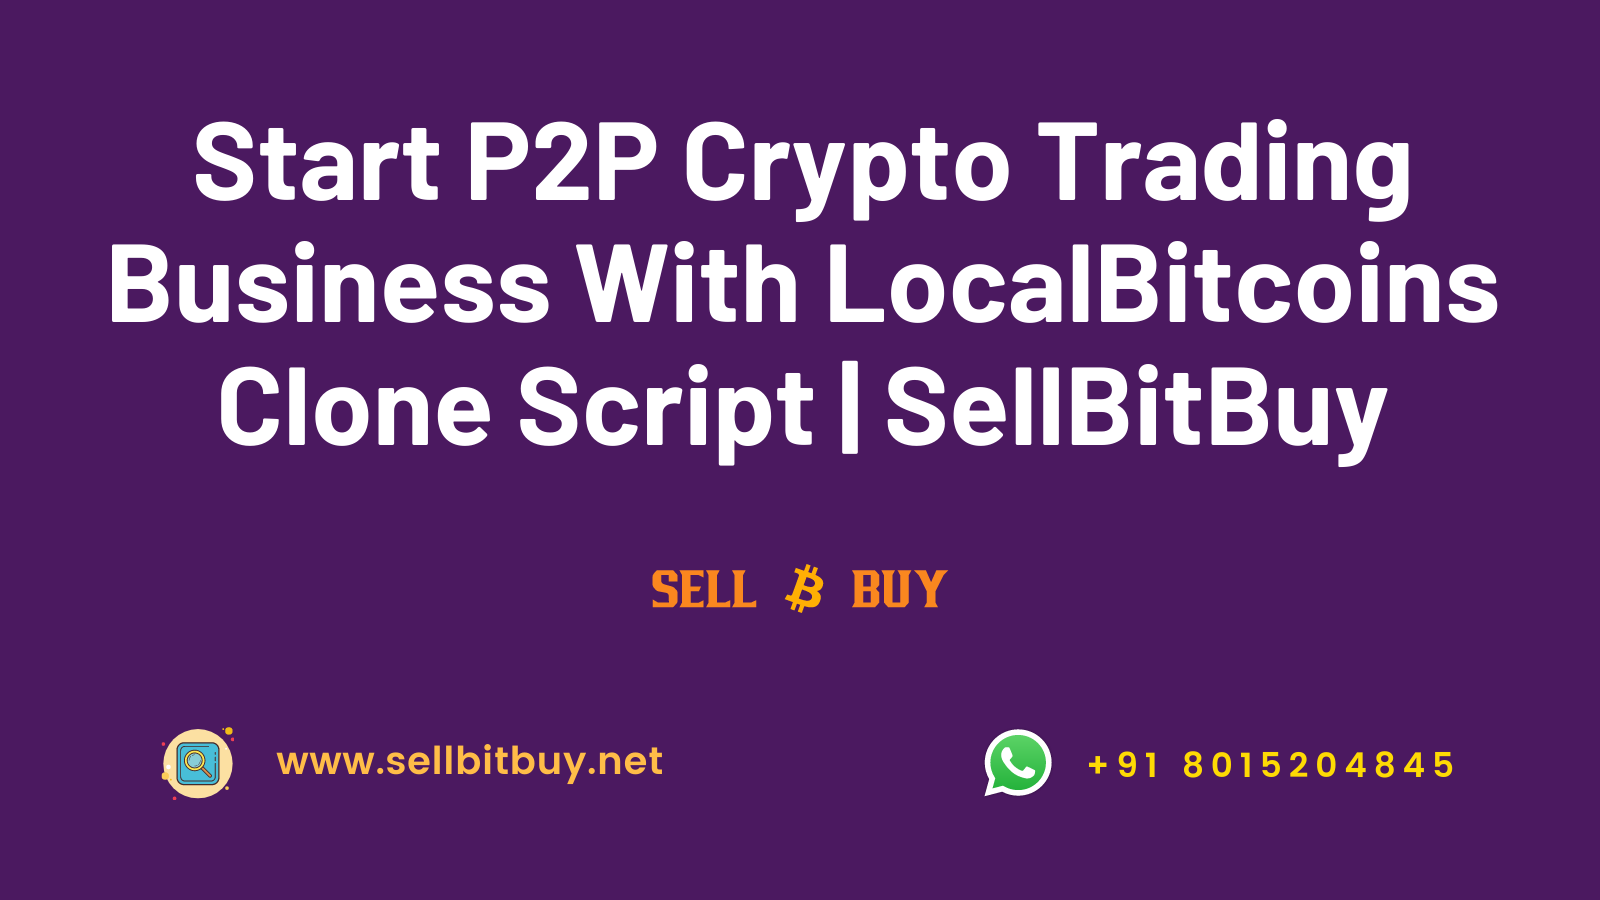 Article about Start P2P Crypto Trading Business With LocalBitcoins Clone Script | SellBitBuy